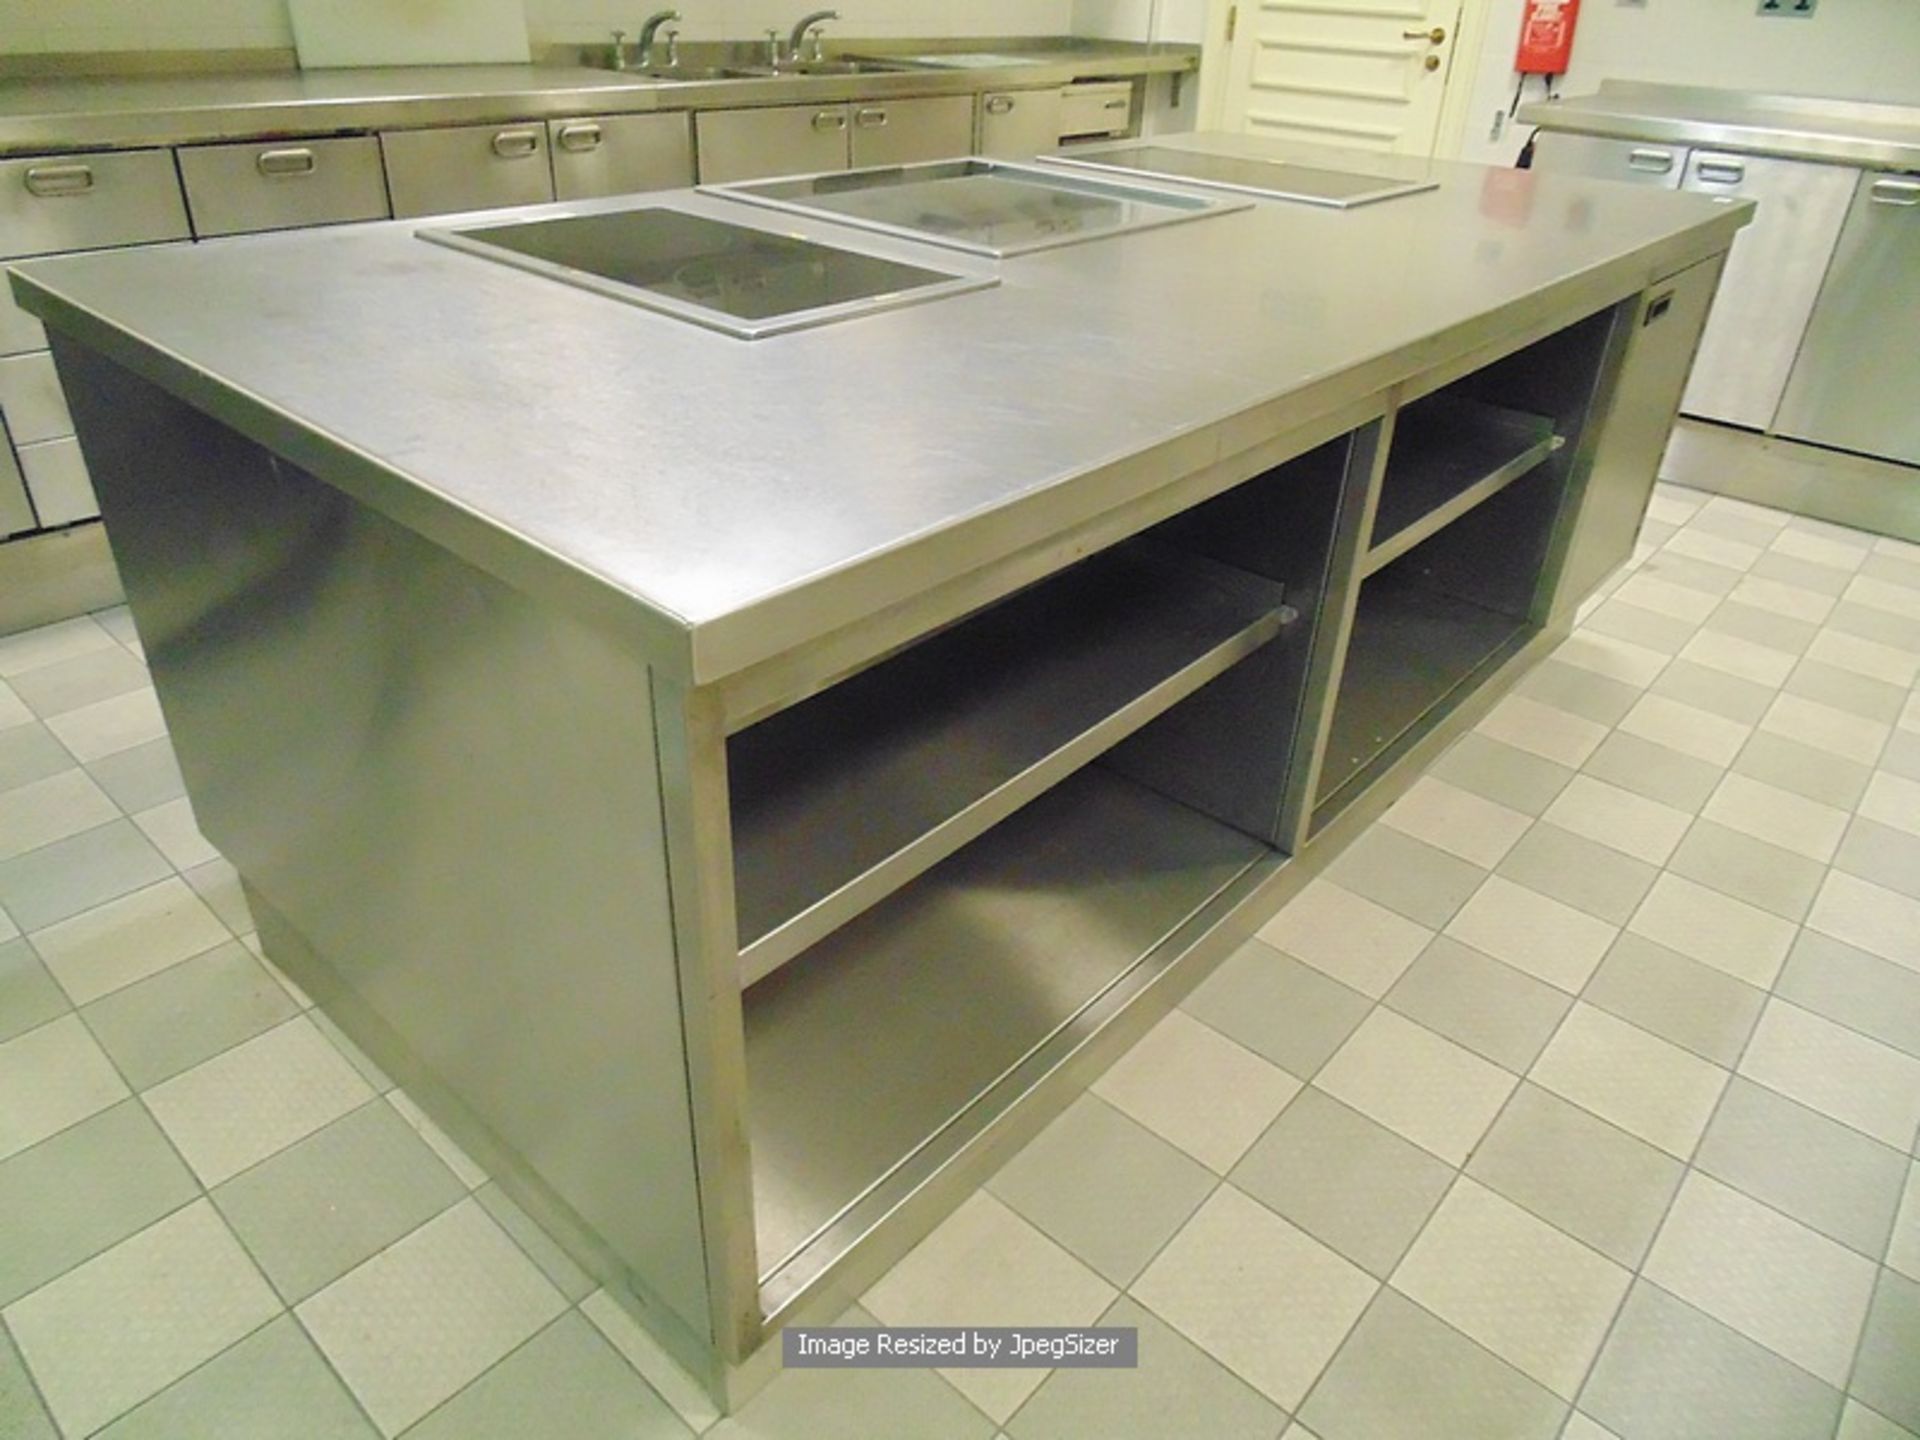 Stainless steel centre Island comprising of 2 x Wells Bloomfield HC2256EU built-in ceramic hotplates - Image 3 of 3